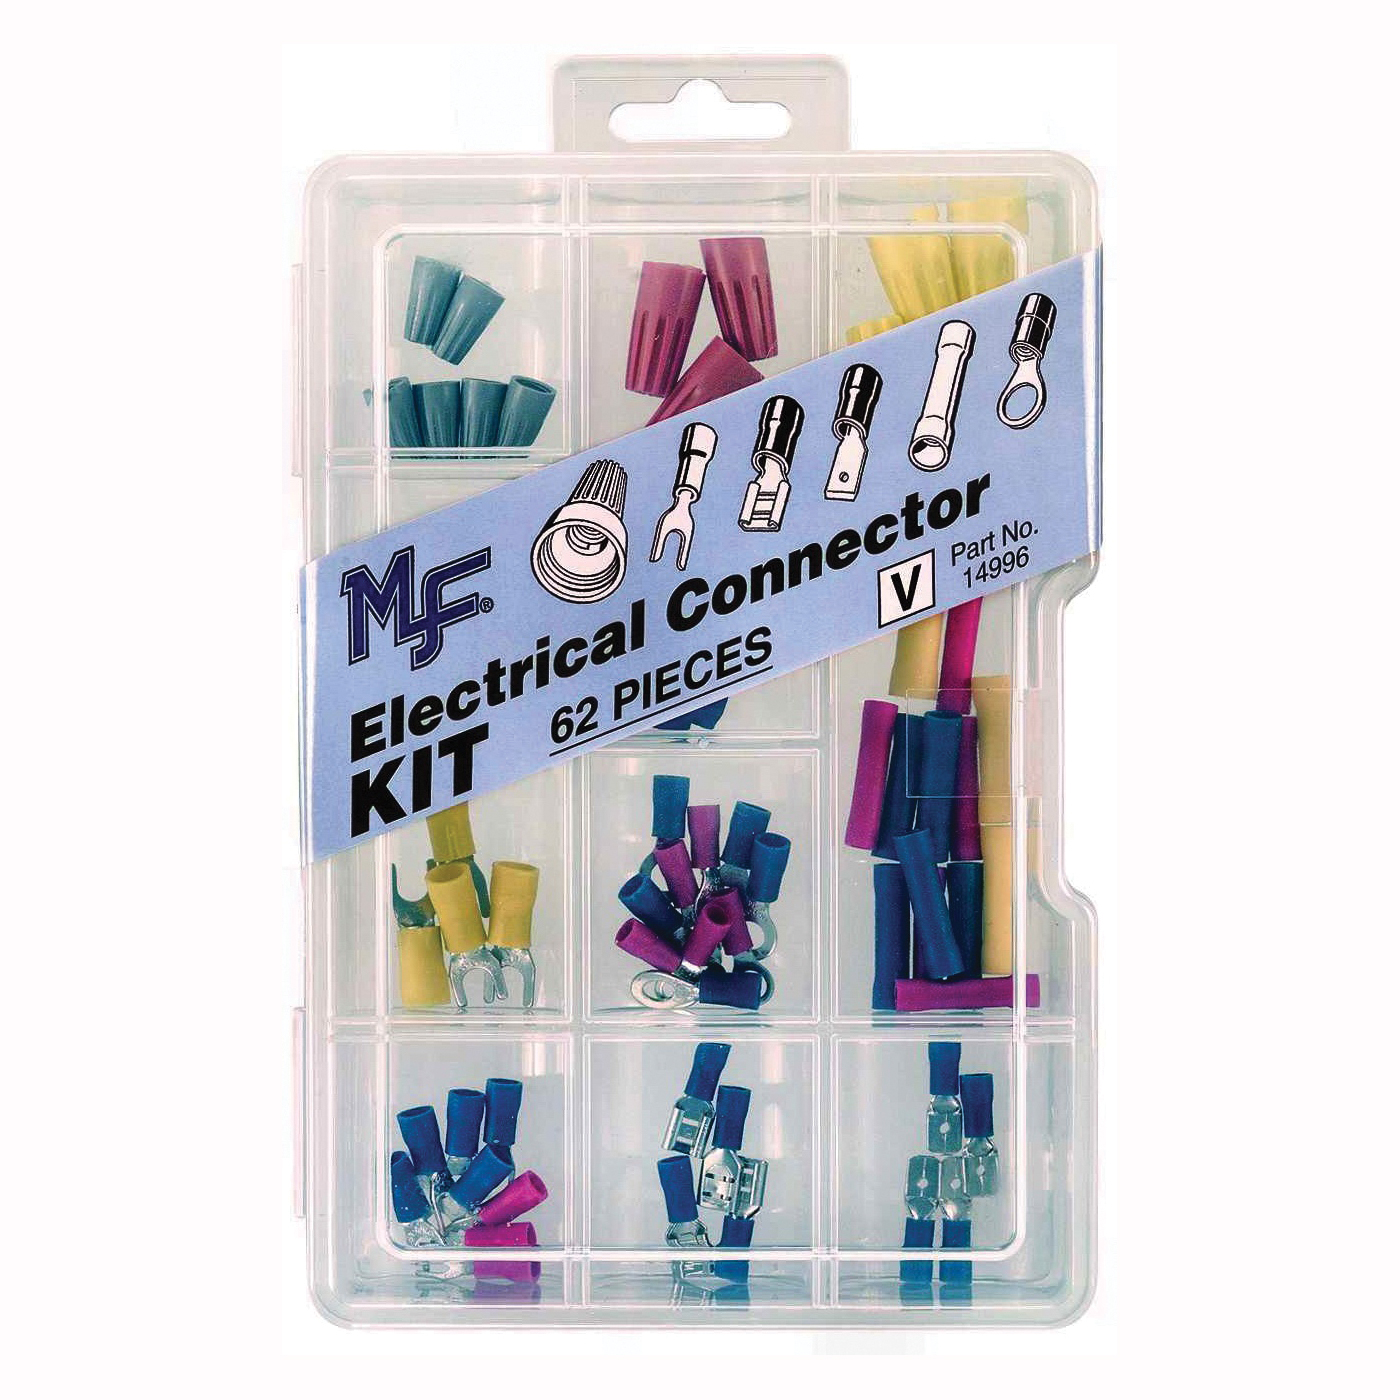 14996 Electrical Connector Kit